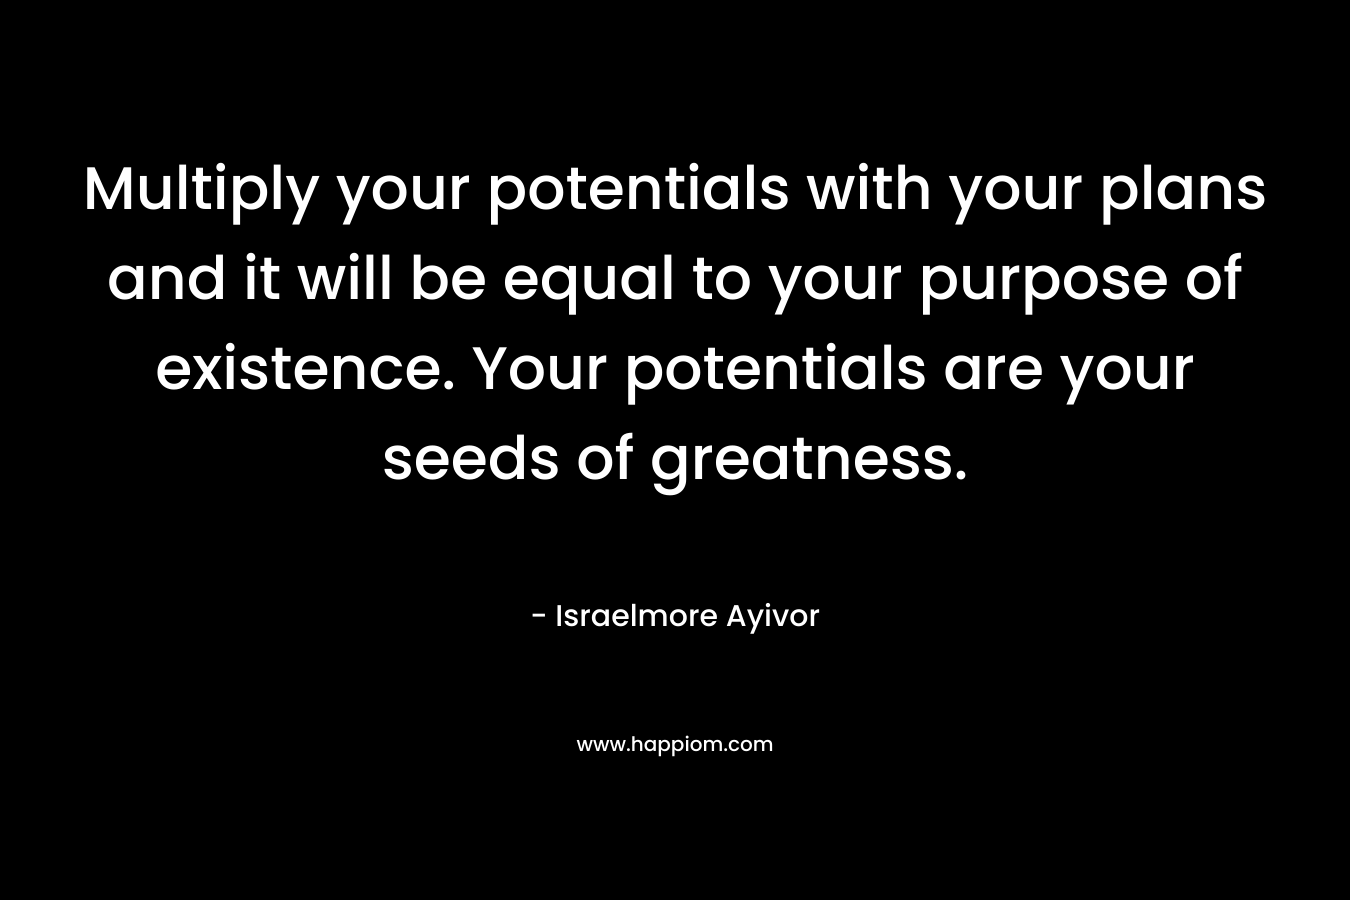 Multiply your potentials with your plans and it will be equal to your purpose of existence. Your potentials are your seeds of greatness. – Israelmore Ayivor